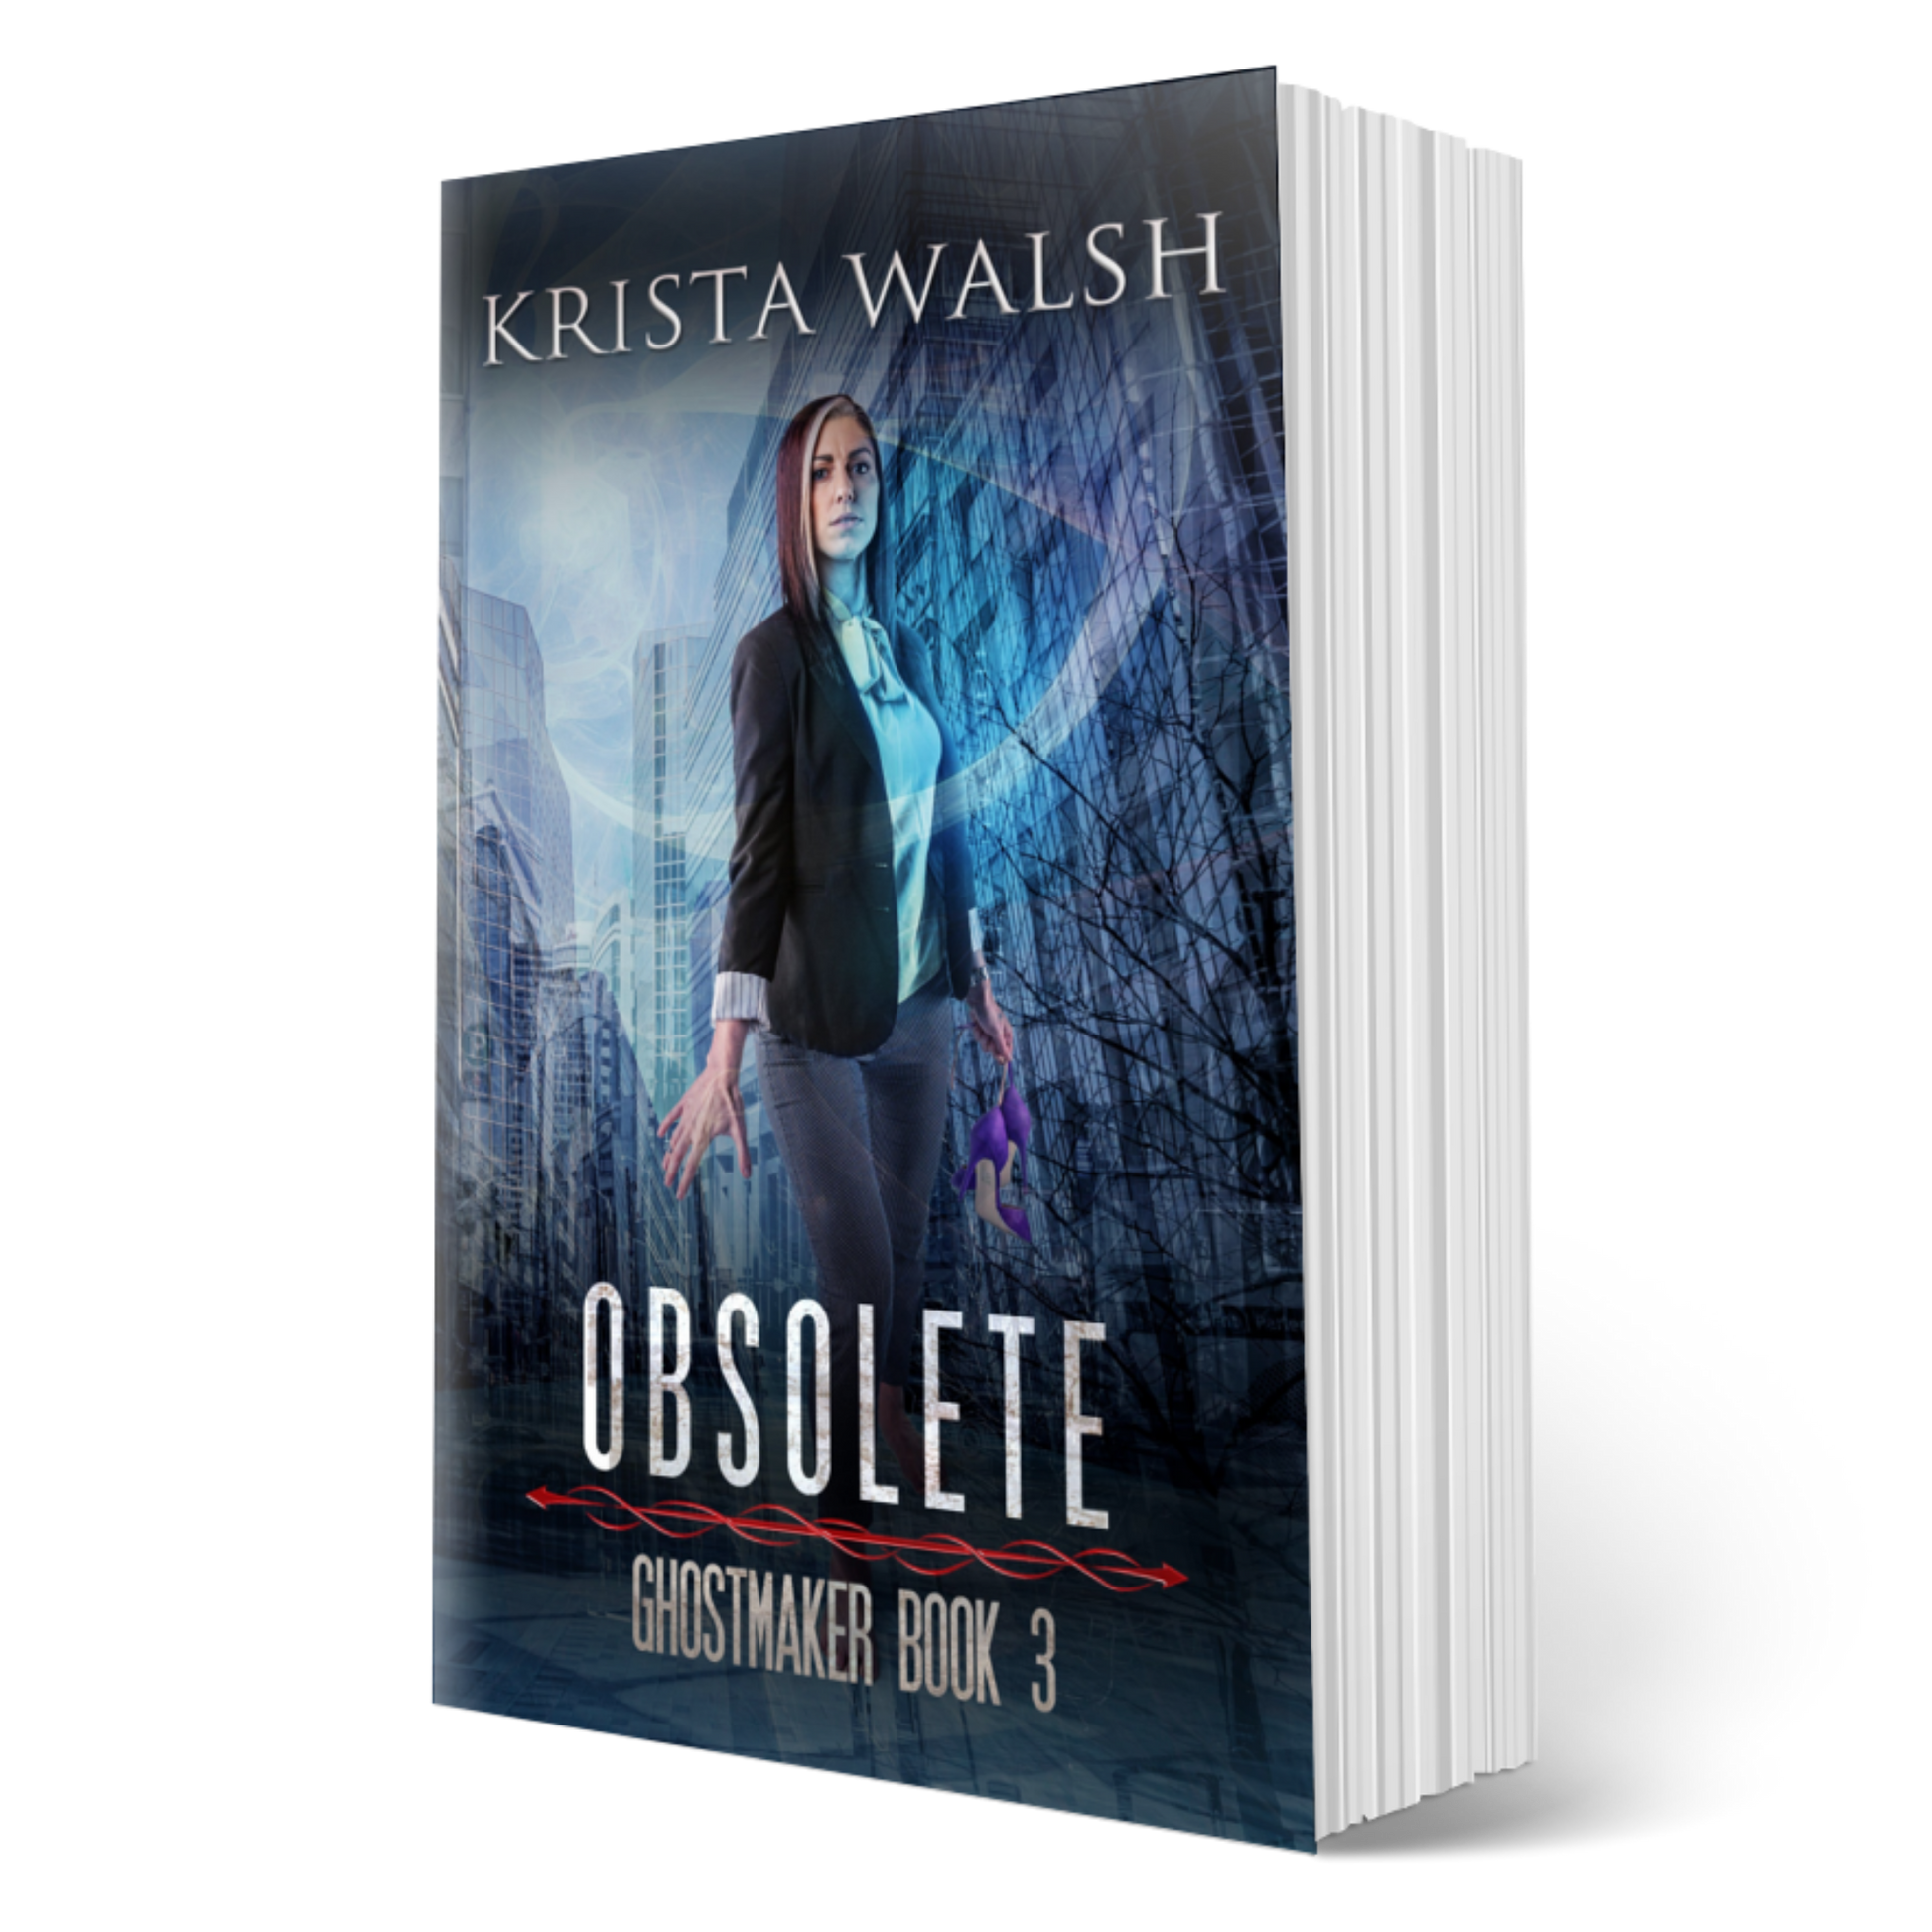 Scared Woman Standing in front of high-rises. Text: Krista Walsh, Obsolete, Ghostmaker Book 3